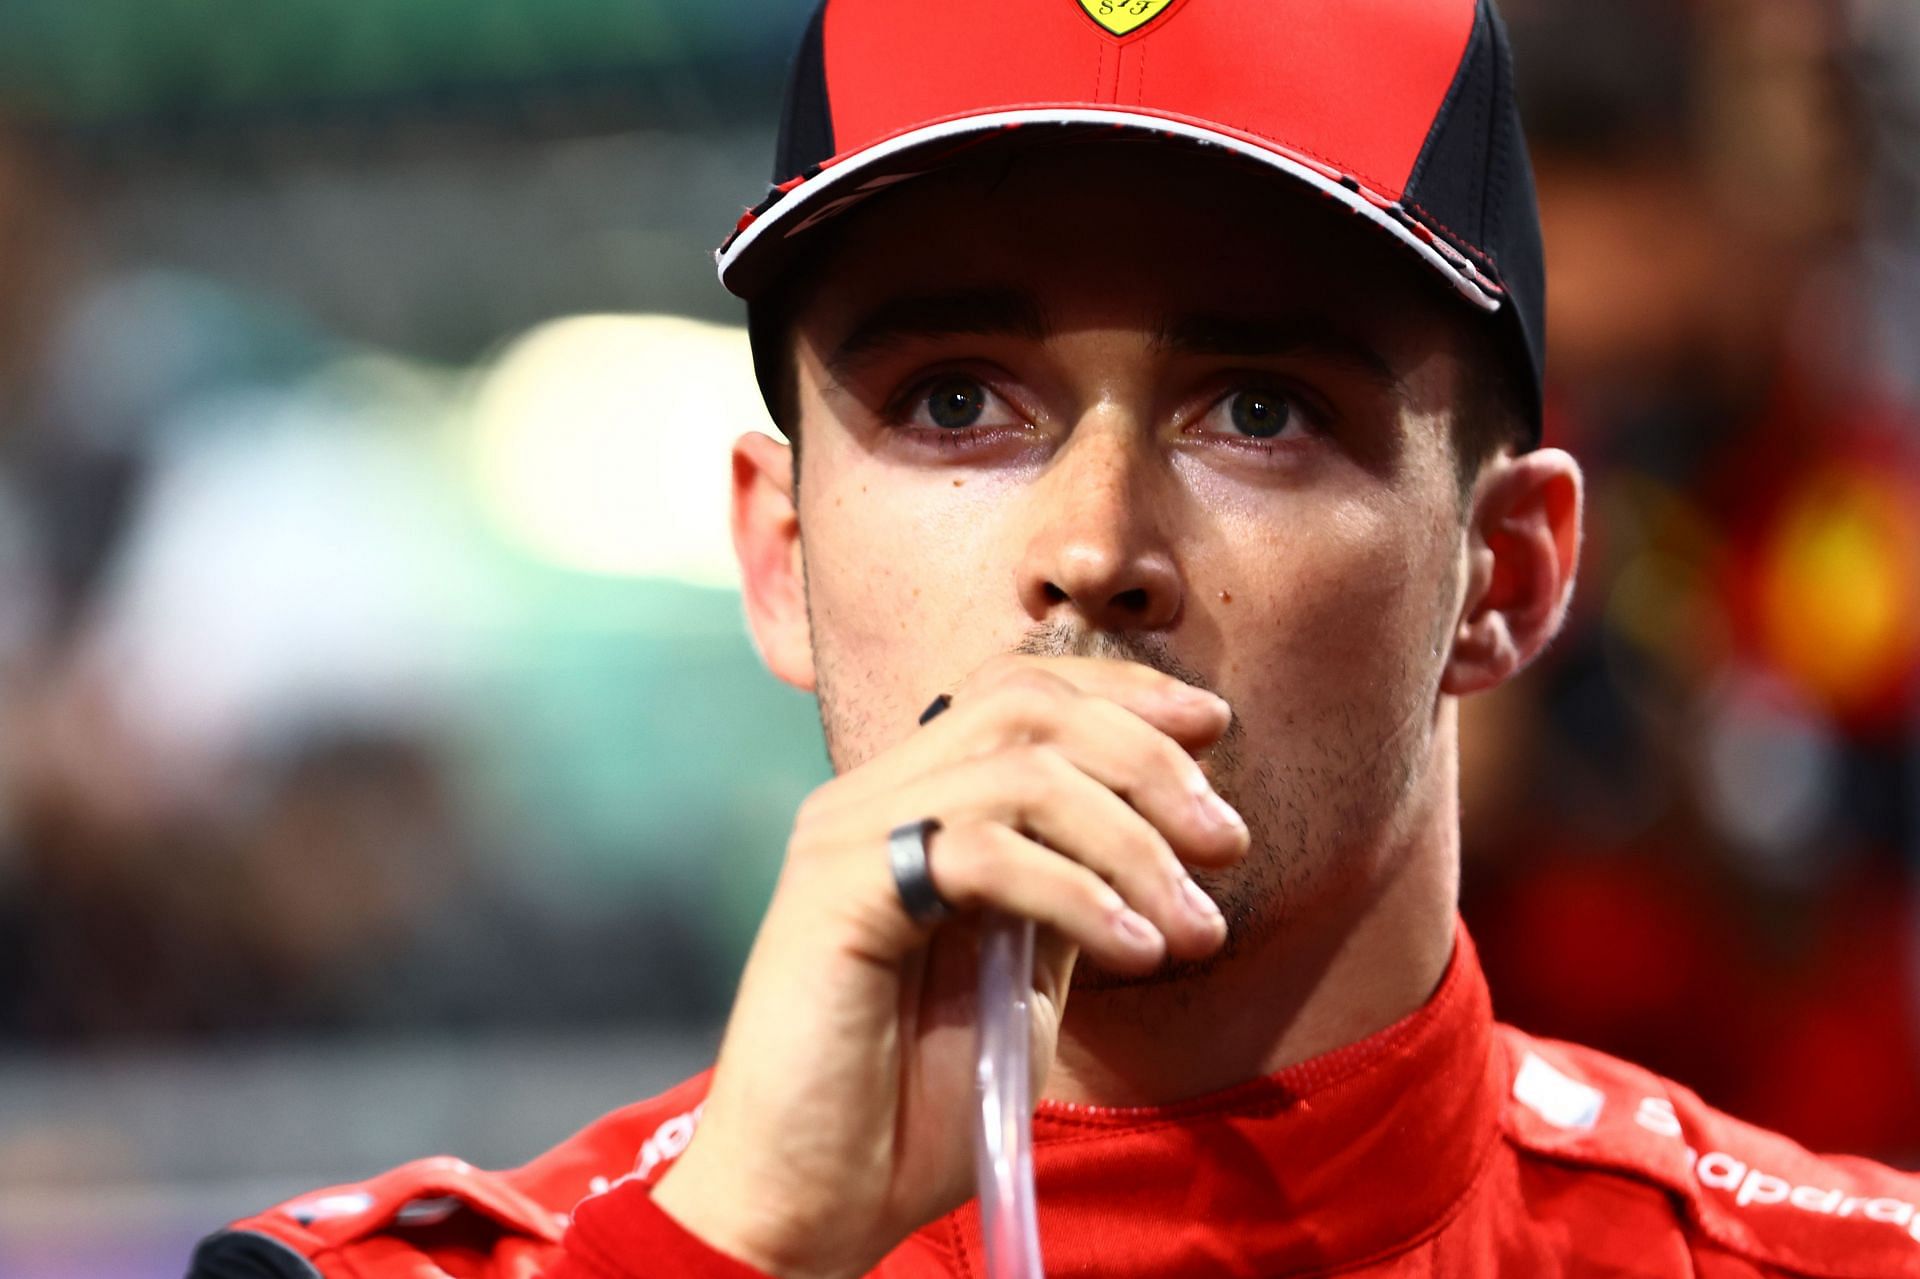 Second placed qualifier Charles Leclerc of Monaco and Ferrari takes a drink in parc ferme during qualifying ahead of the F1 Grand Prix of Saudi Arabia at the Jeddah Corniche Circuit on March 26, 2022 in Jeddah, Saudi Arabia. (Photo by Mark Thompson/Getty Images)